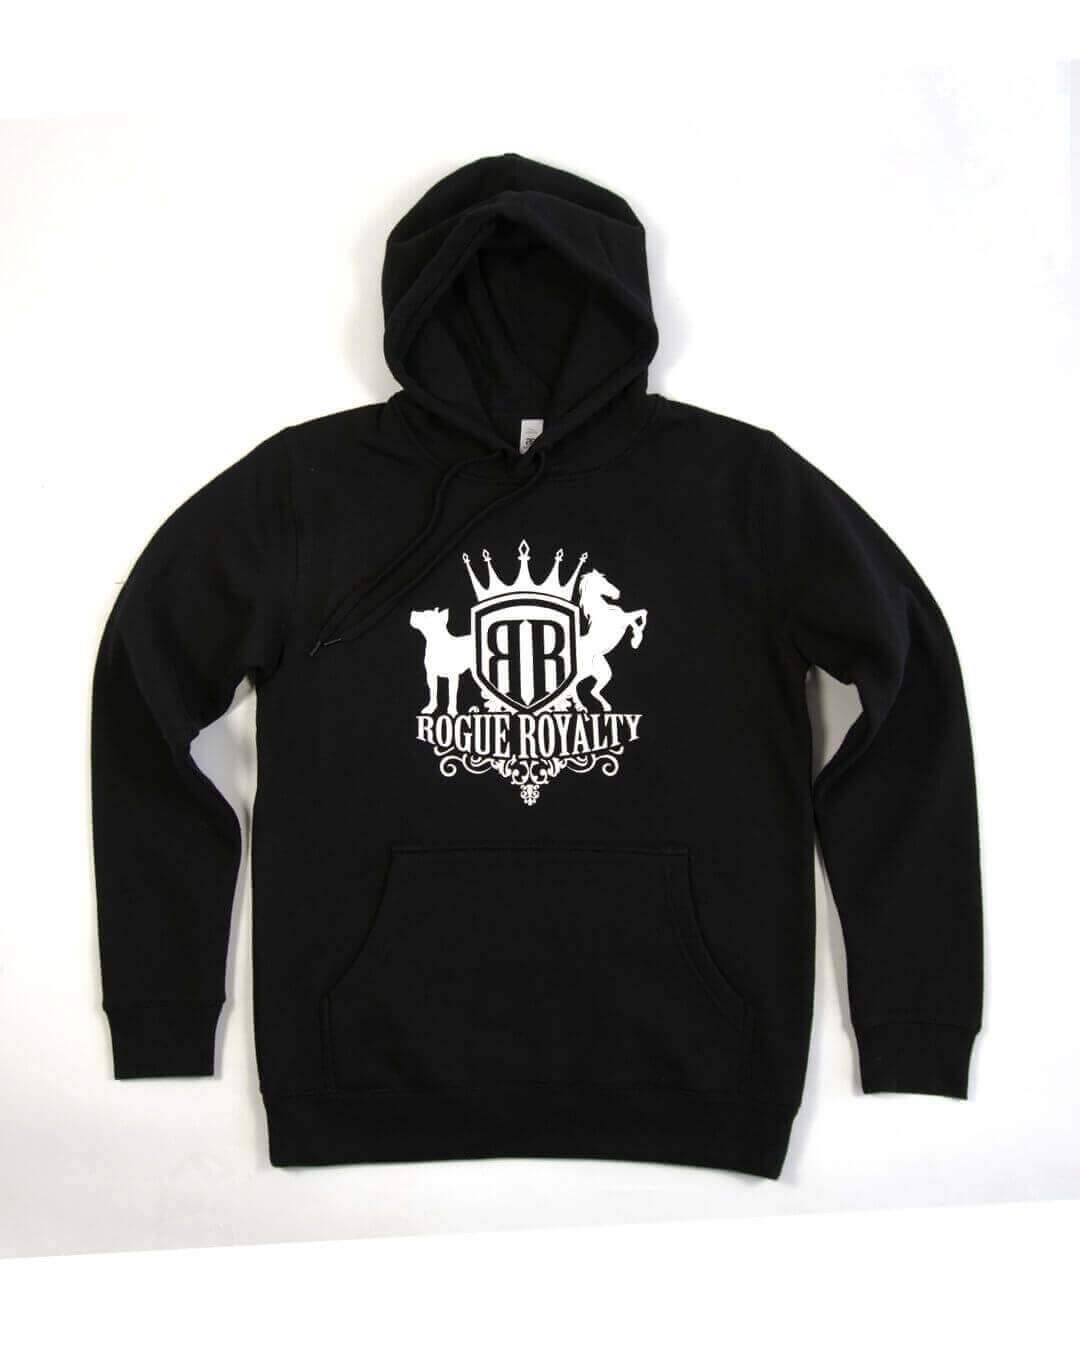 Rogue Royalty Merchandise - Clothing